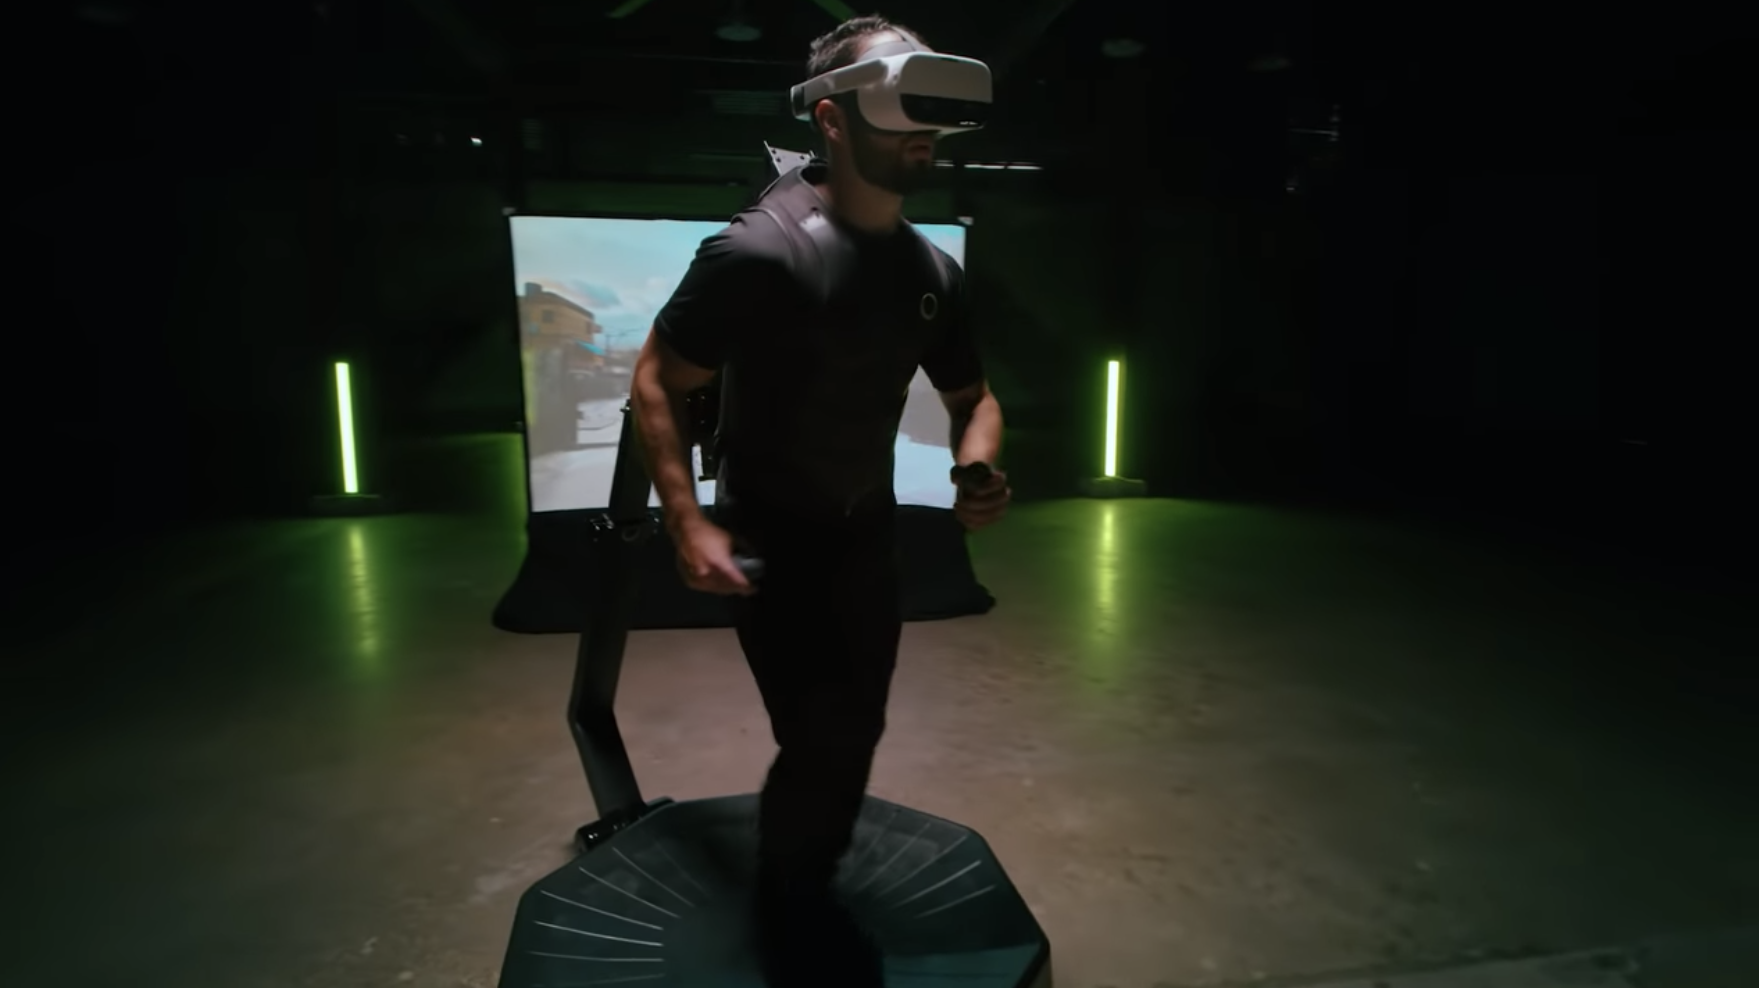 Virtuix's Omni One Omnidirectional Treadmill Looks Freaking Incredible For A Home VR Experience Stuff South Africa